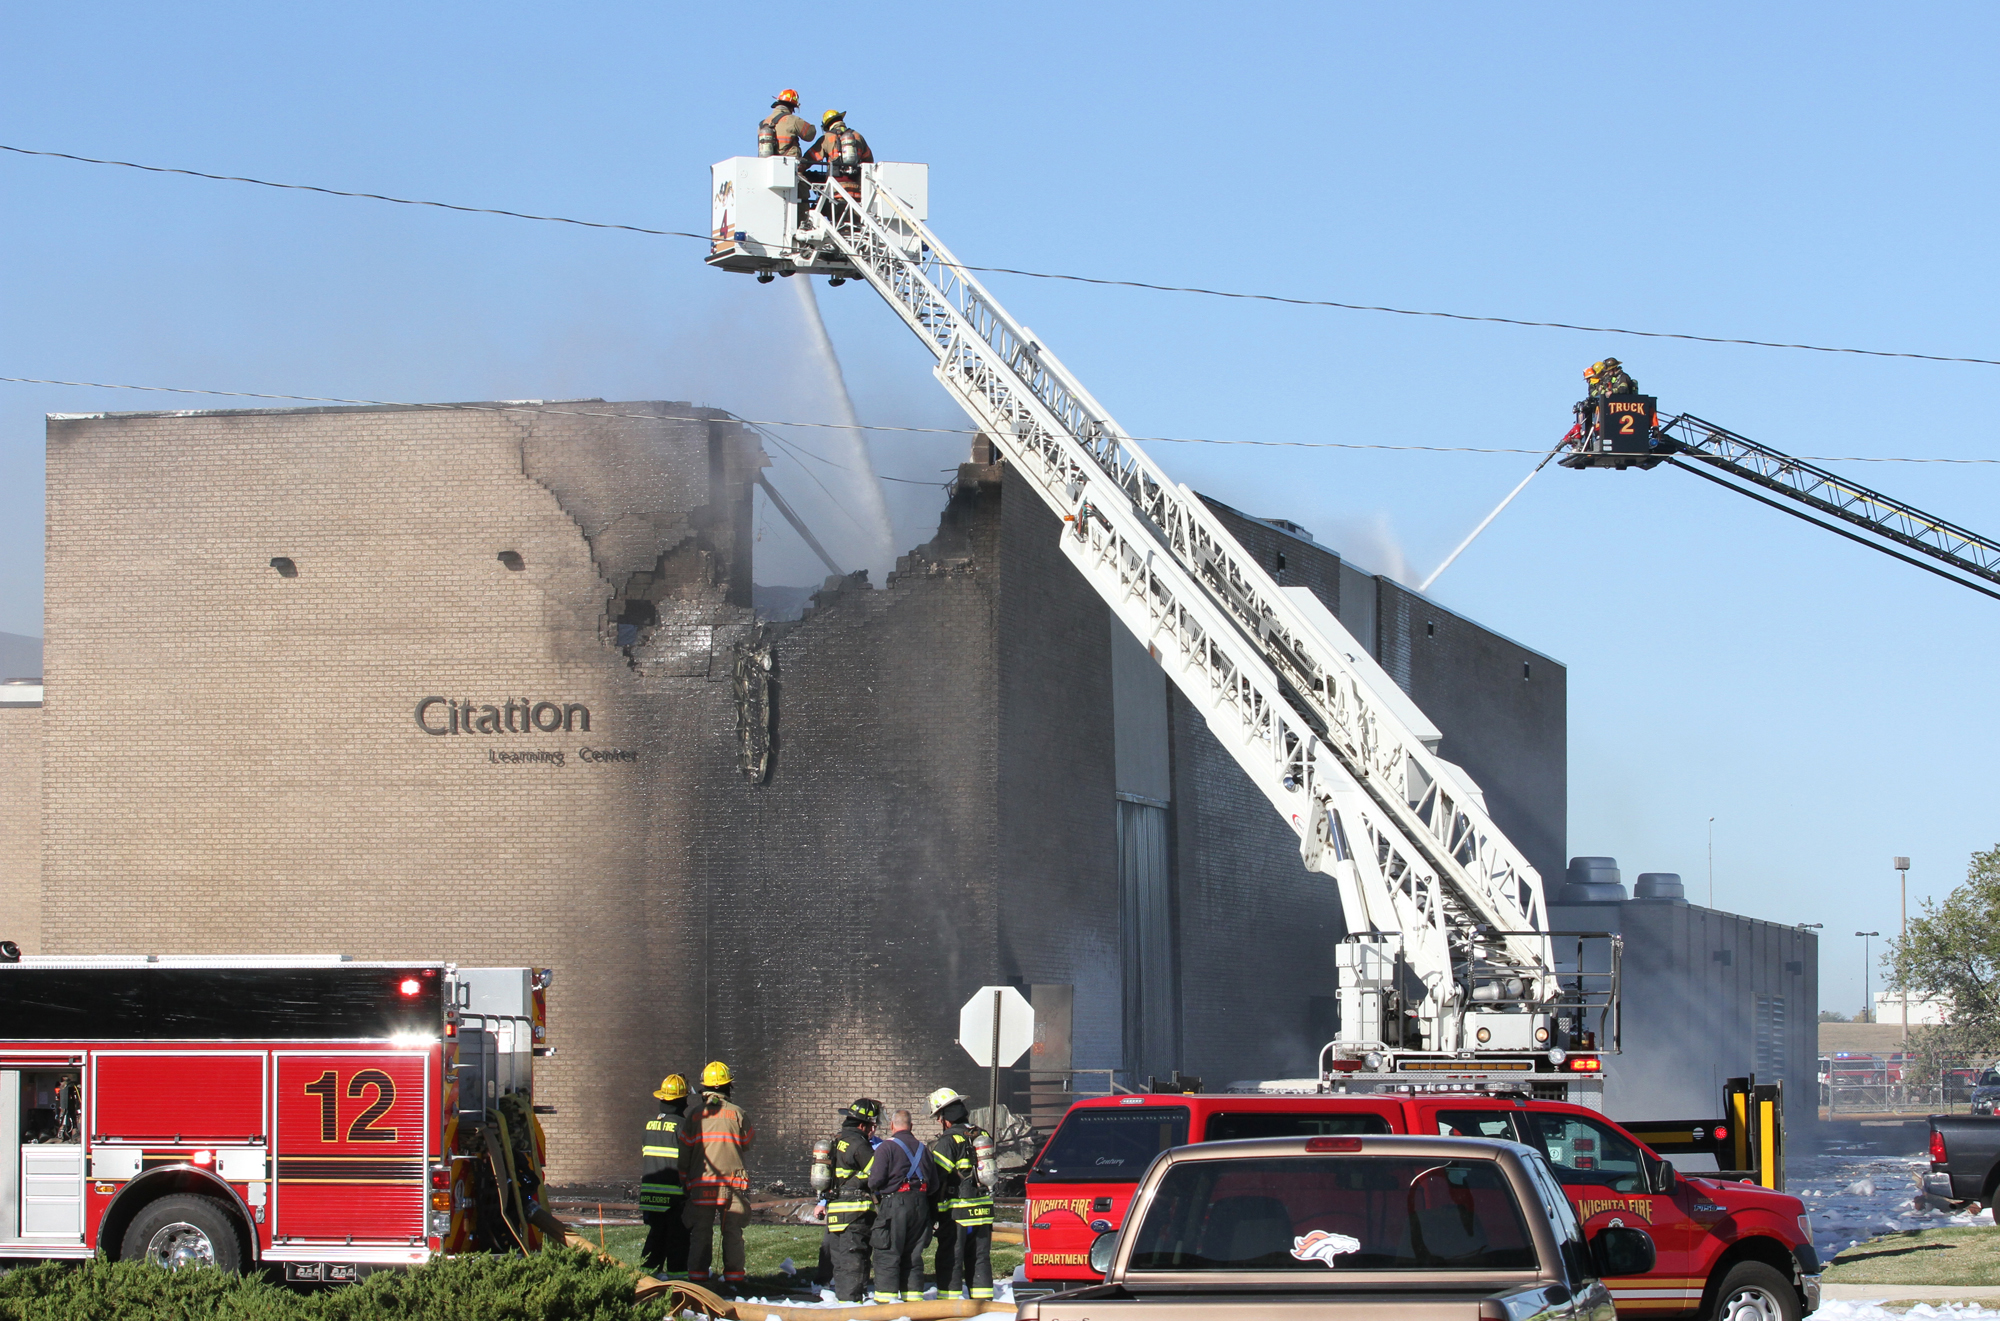 Firefighters try to put out a fire at Mid-Continent Airport in Wichita, Kan. on Oct. 30, 2014 shortly after a small plane crashed into the building killing several people including the pilot. (Brian Corn—AP)